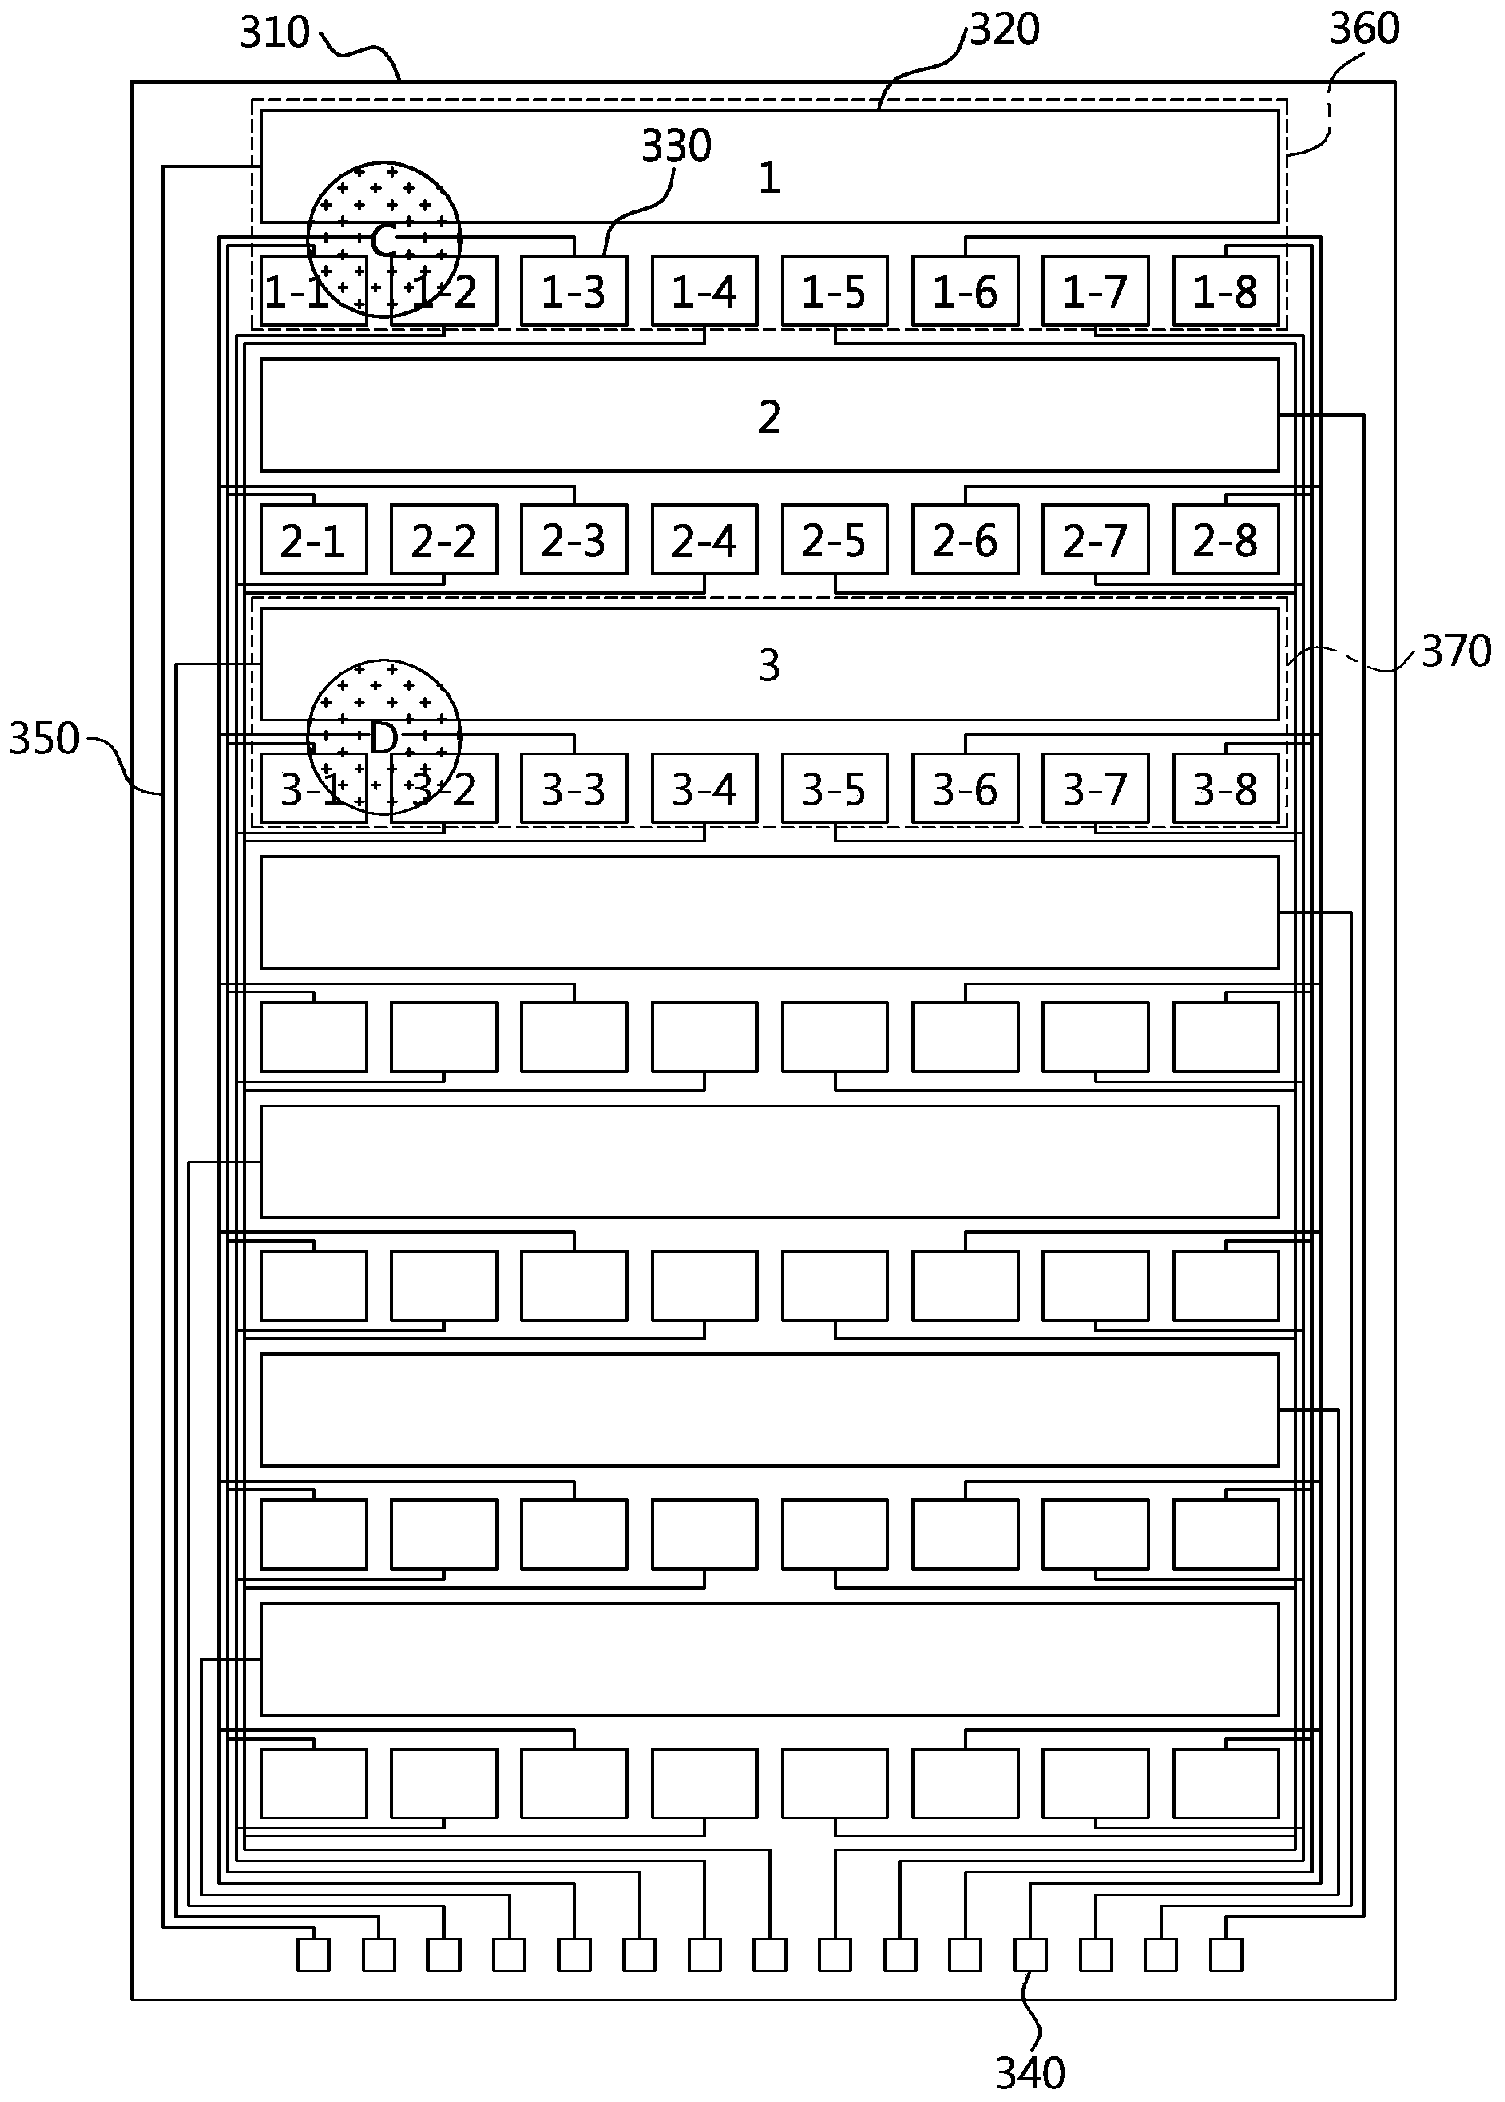 Apparatus and method for detecting contact